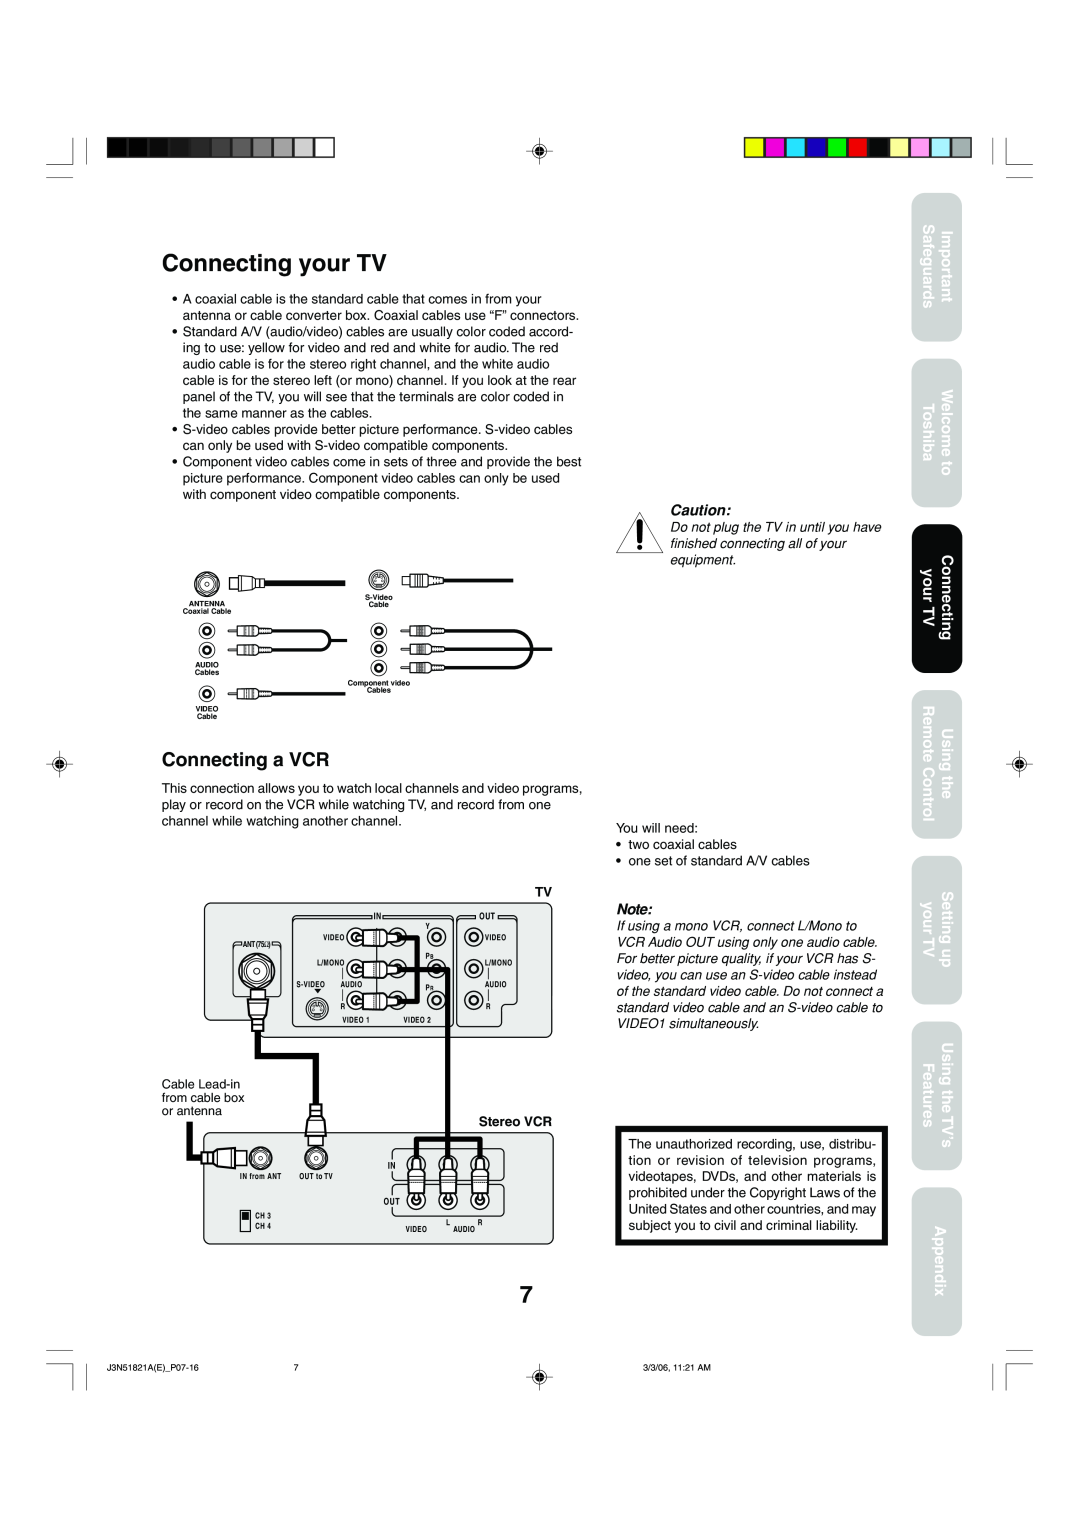 Toshiba 32A36C Connecting your TV, Connecting a VCR, Safeguards Toshiba your TV Remote Control, your TV Features, Appendix 